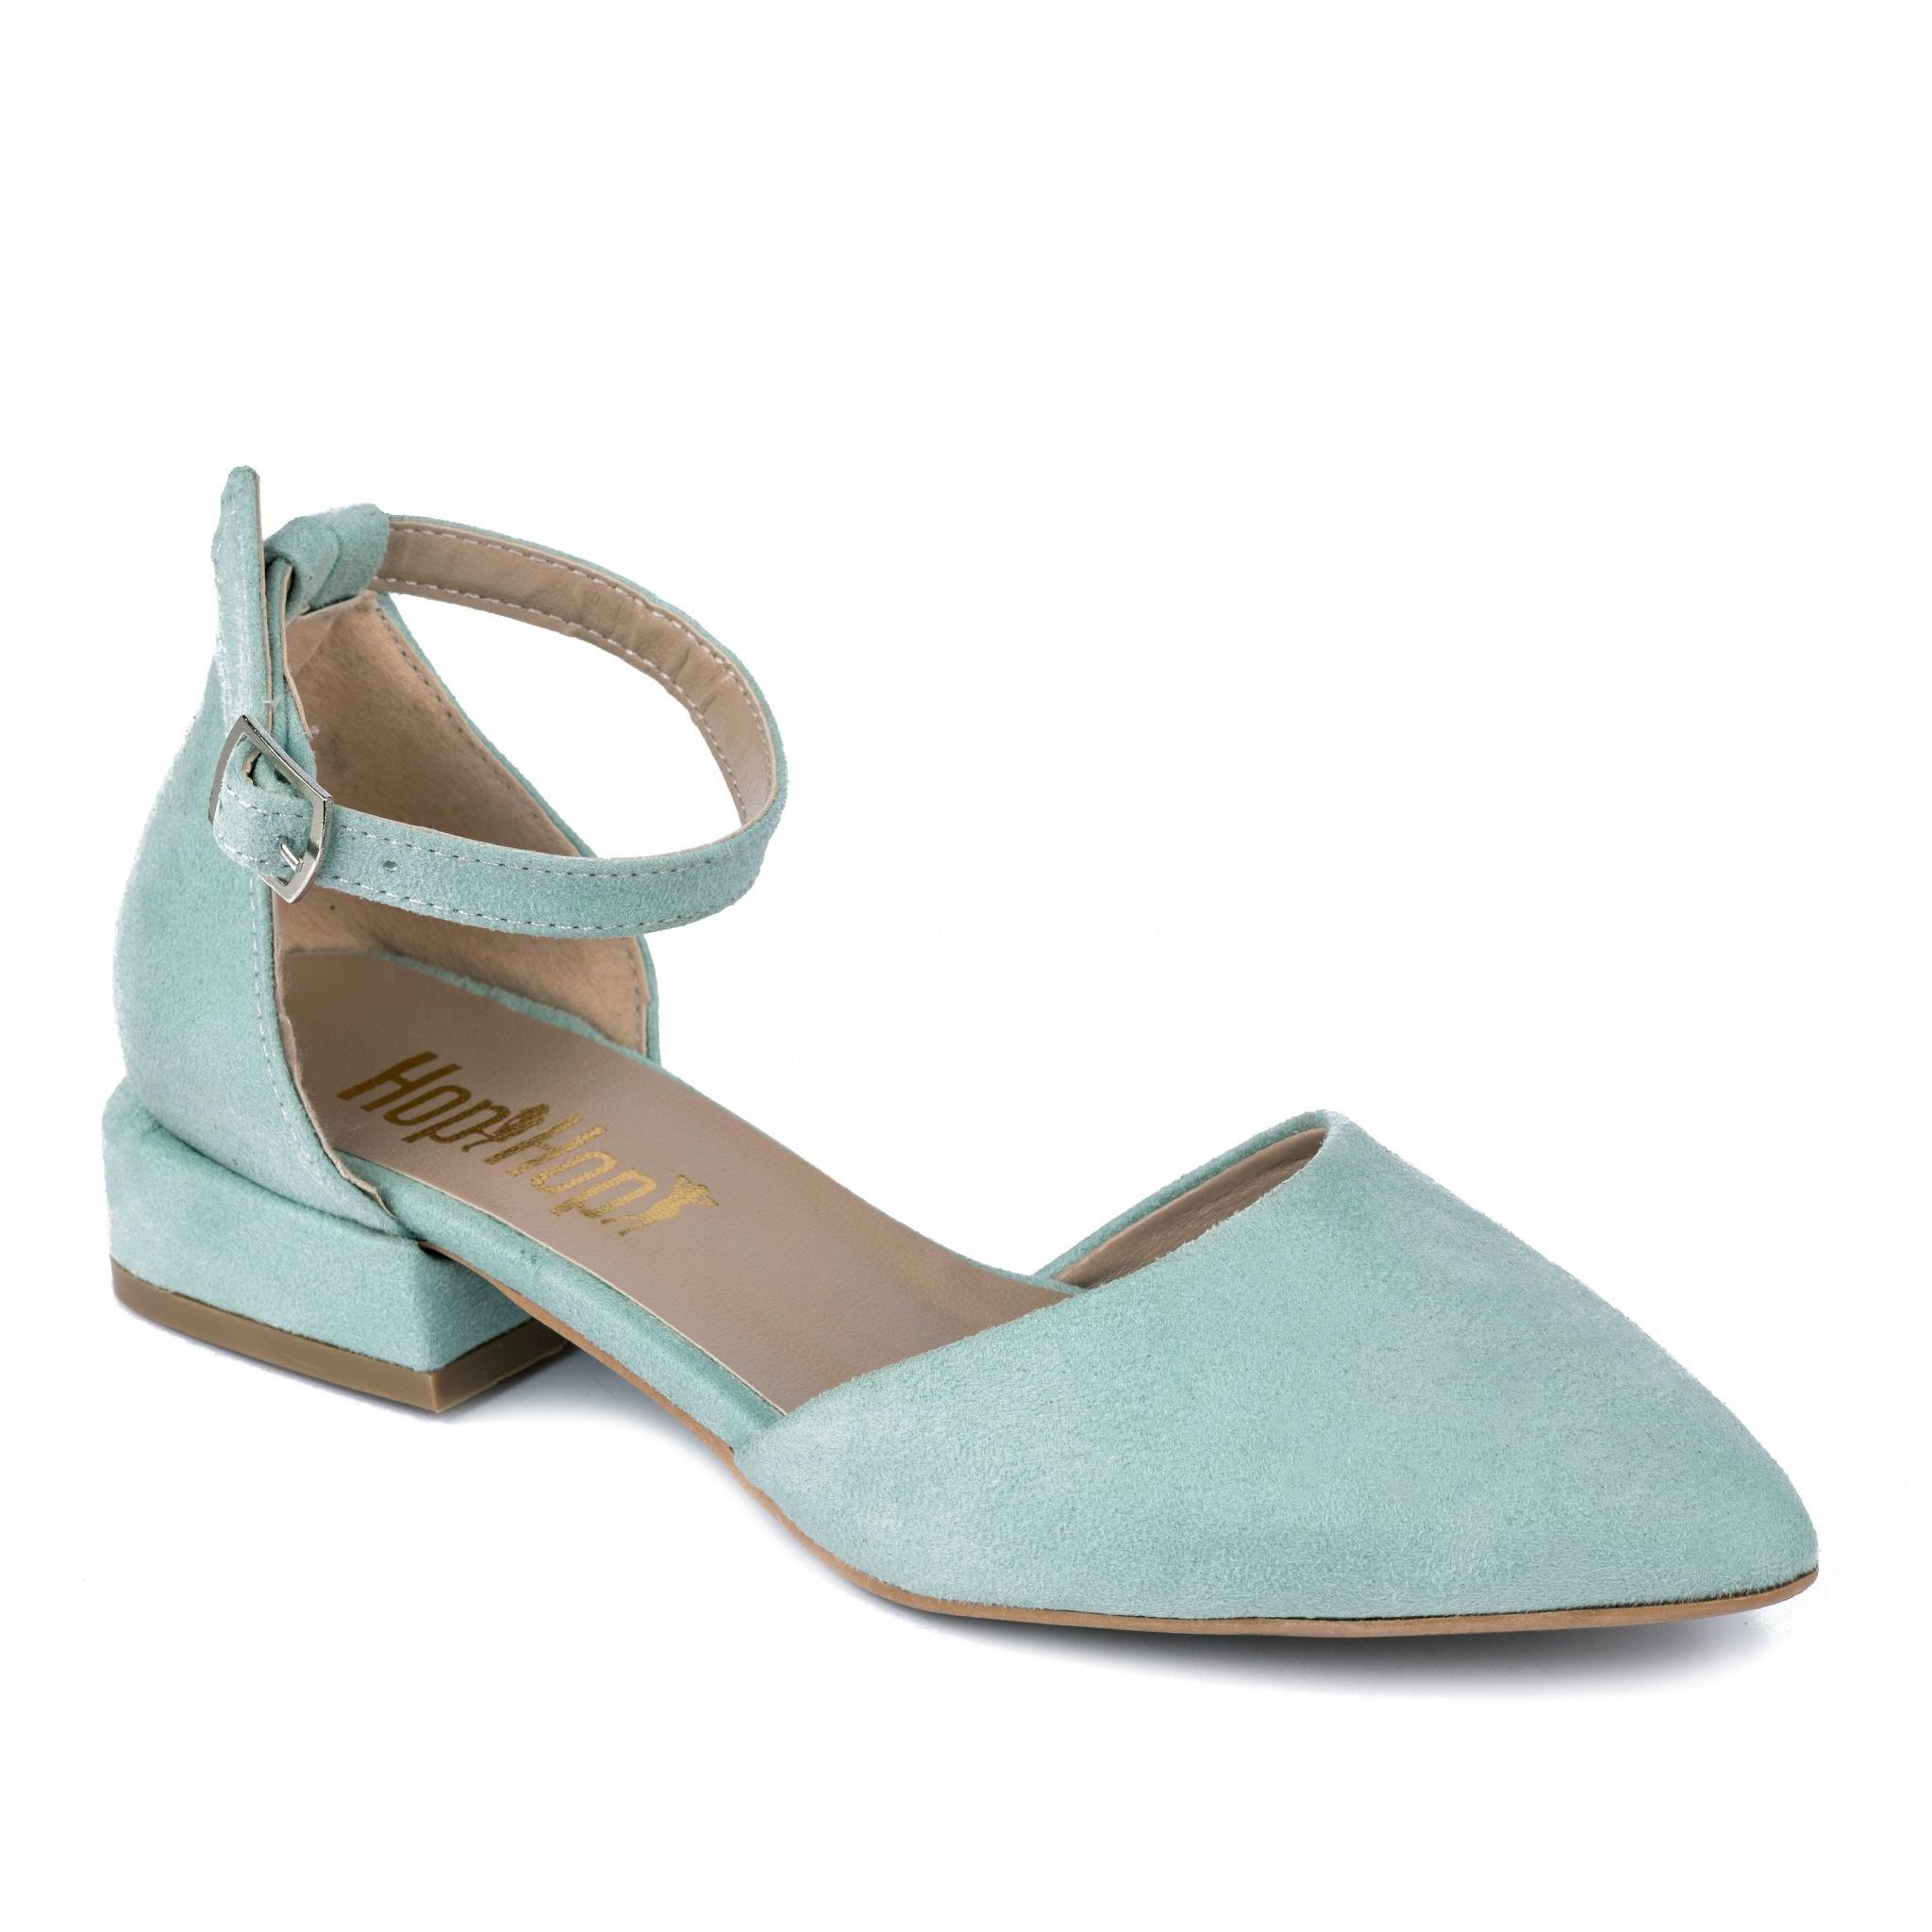 POINTED SANDALS WITH LOW BLOCK HEEL - MINT